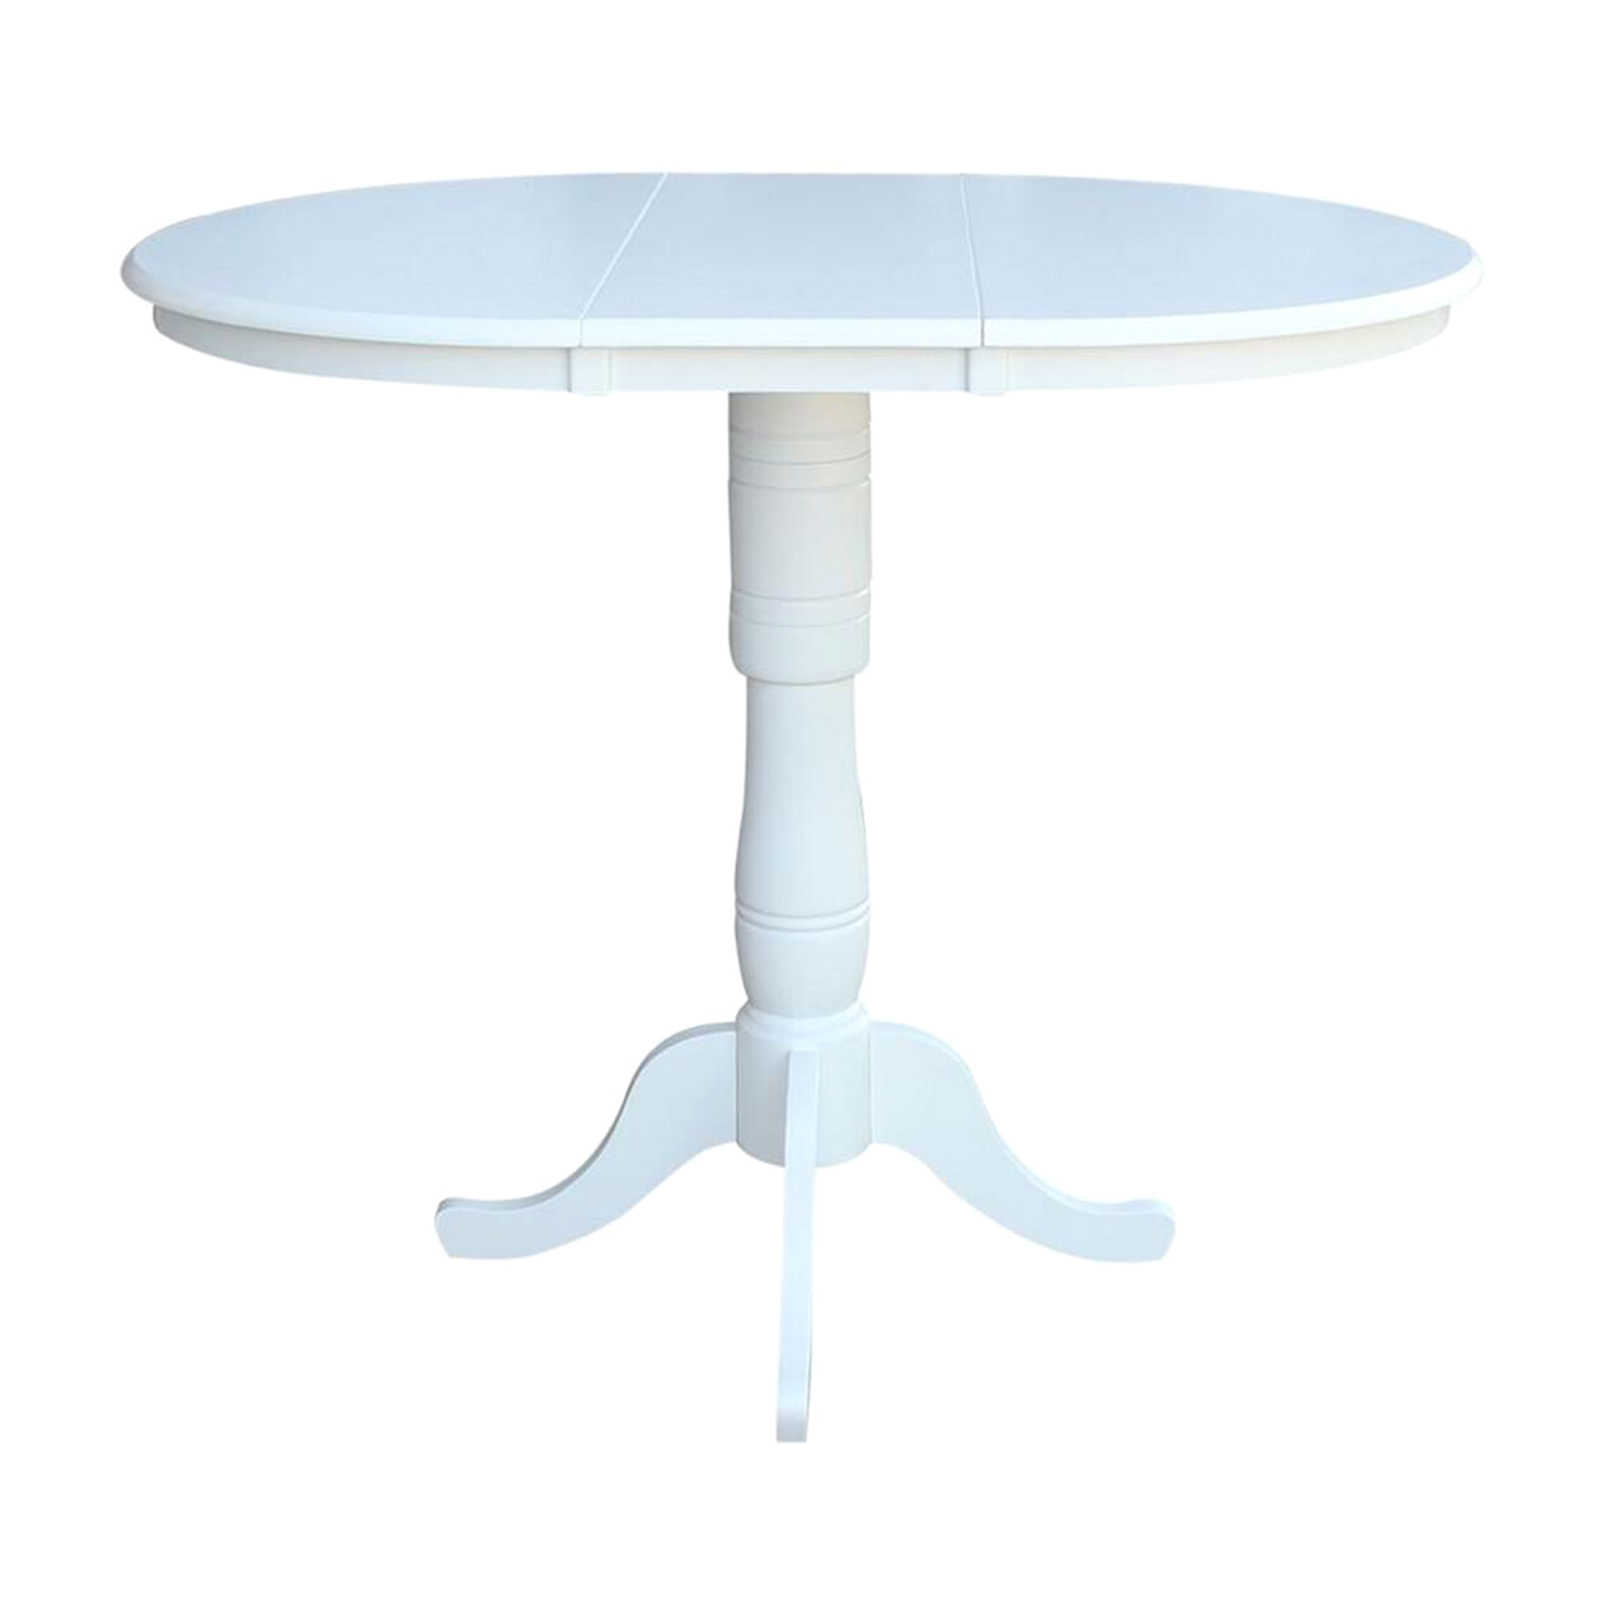 International Concepts Butcher Top Round Pedestal Table - White